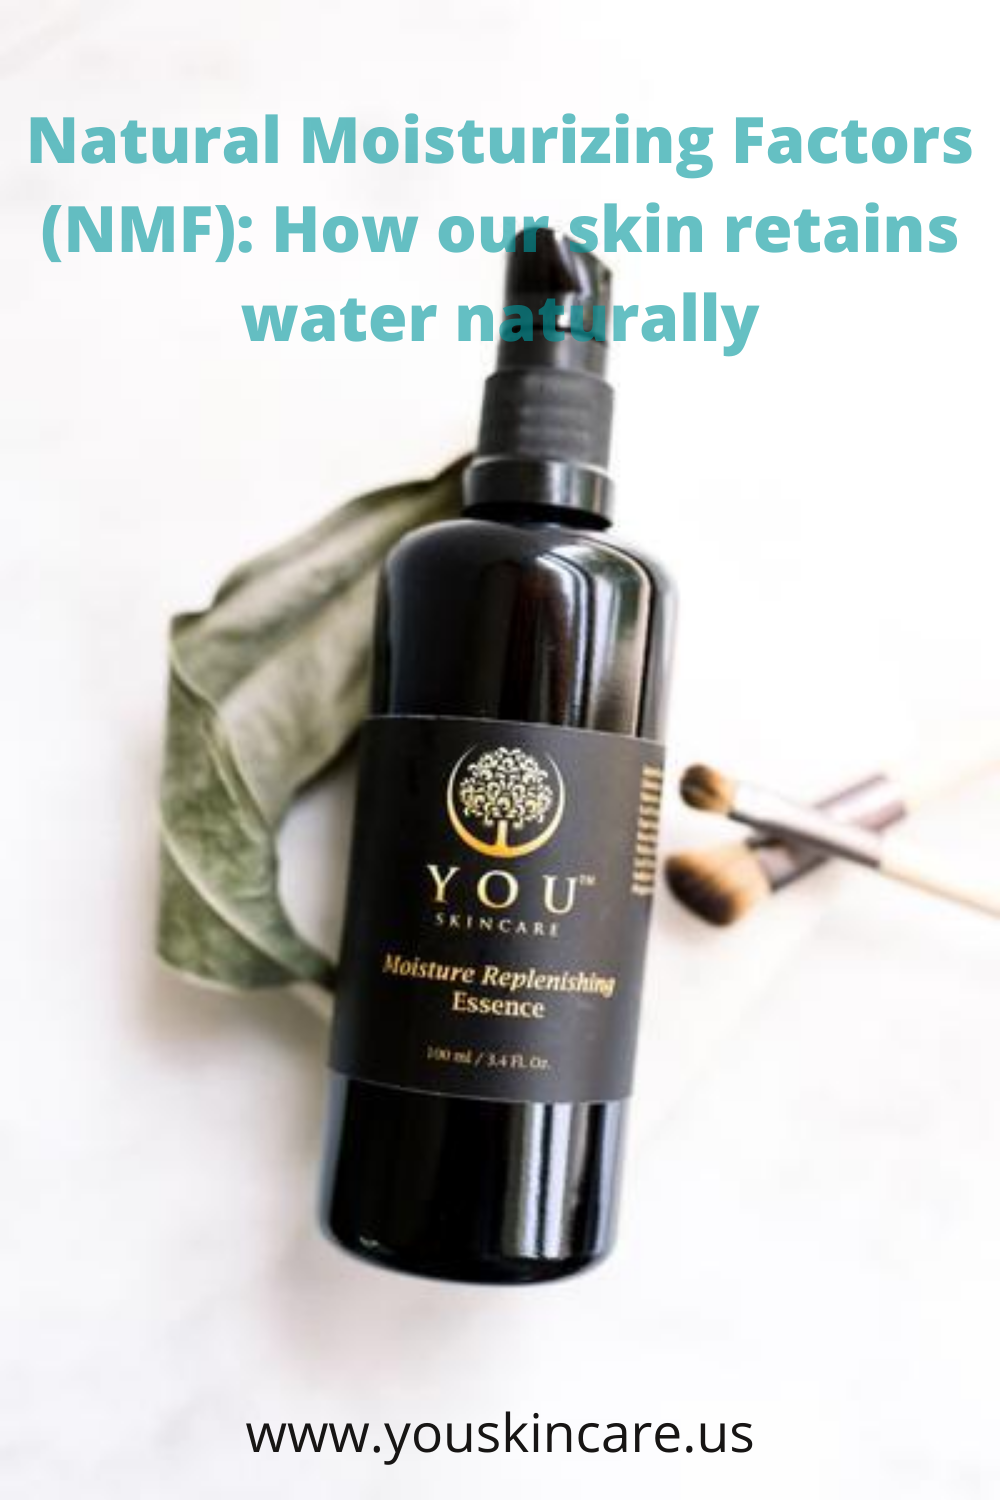 Natural Moisturizing Factors (NMF): How our skin retains water naturally